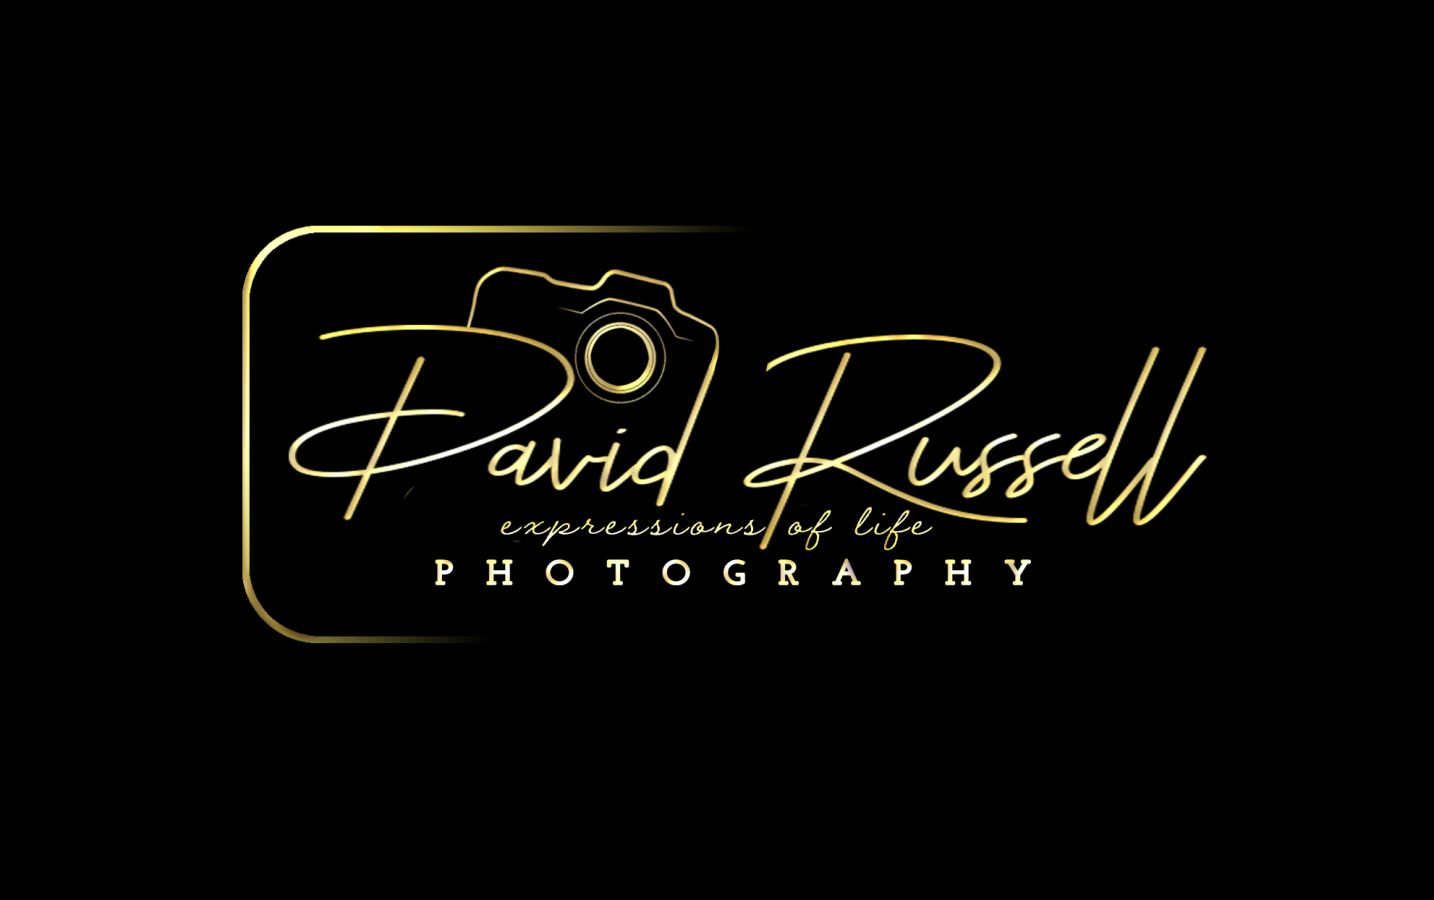 Visit David Russell Photography